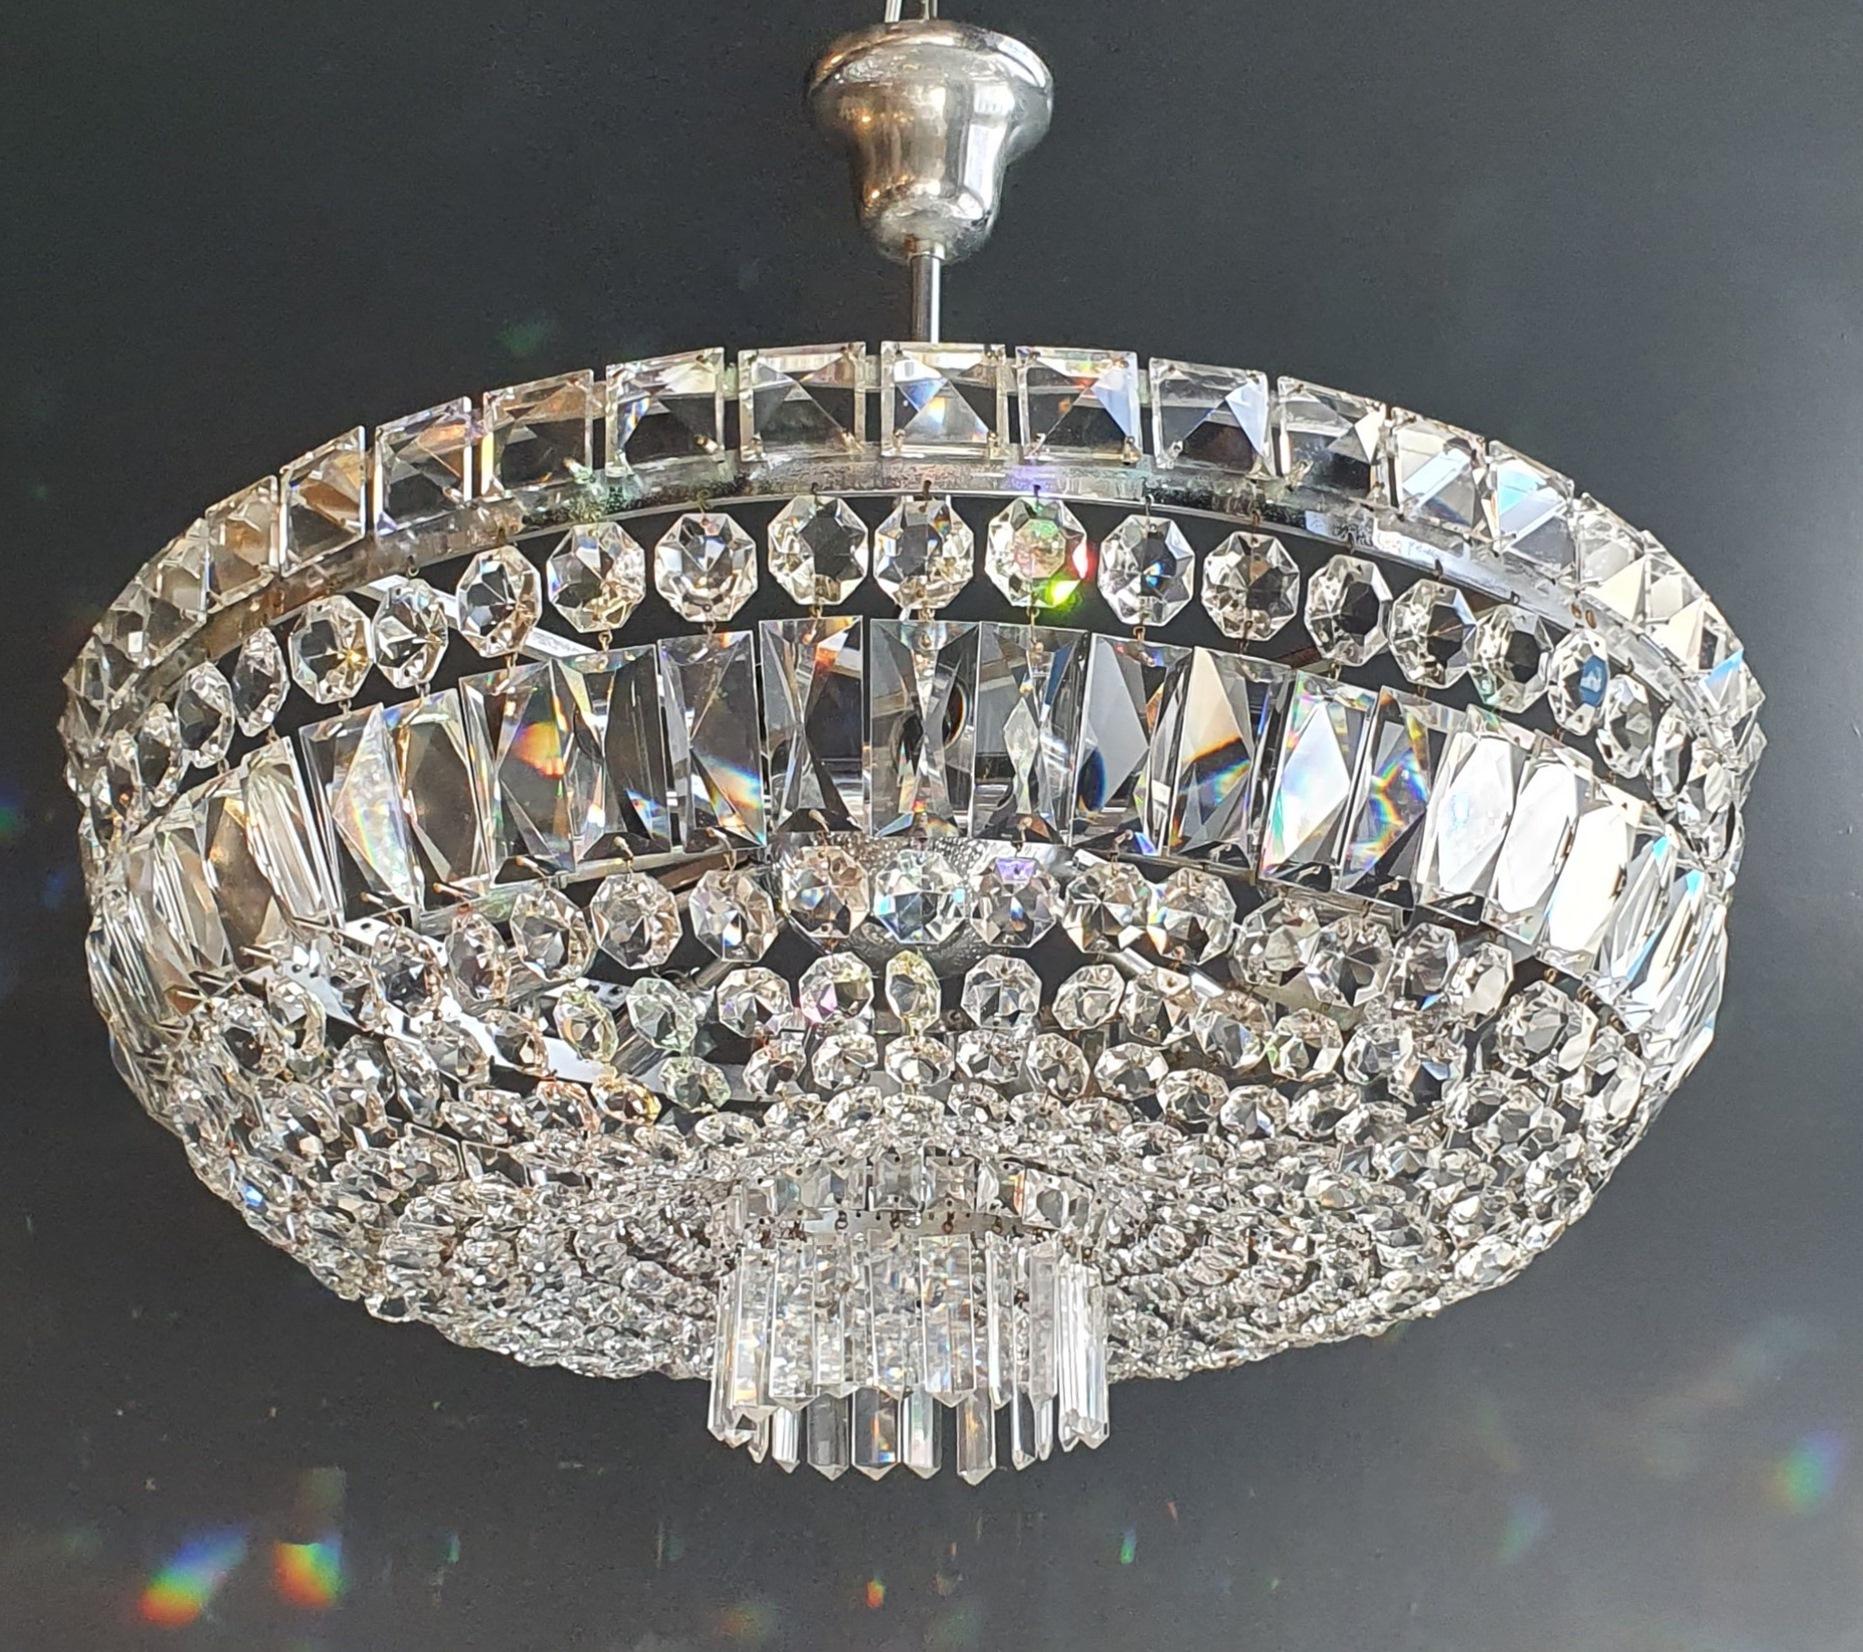 Introducing our beloved old chandelier, meticulously and professionally restored in Berlin. Its electrical wiring is fully compatible with the US, having been re-wired and made ready to hang. Every crystal has been carefully hand-knotted, and not a